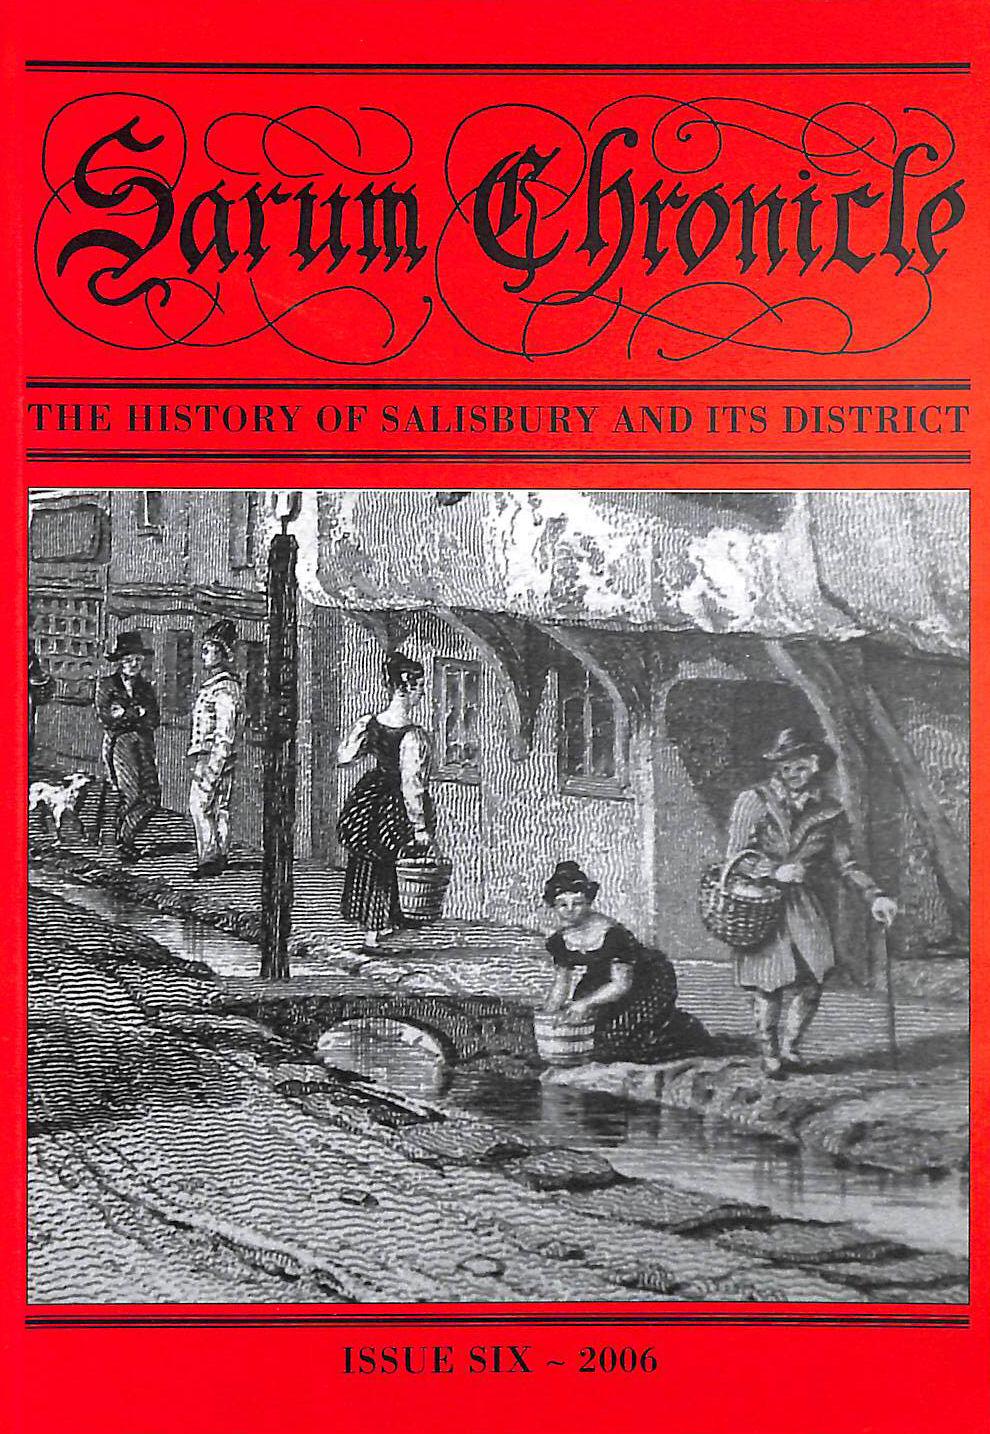 SARUM CHRONICLE - Sarum Chronicle: The History of Salisbury and Its District: v. 6